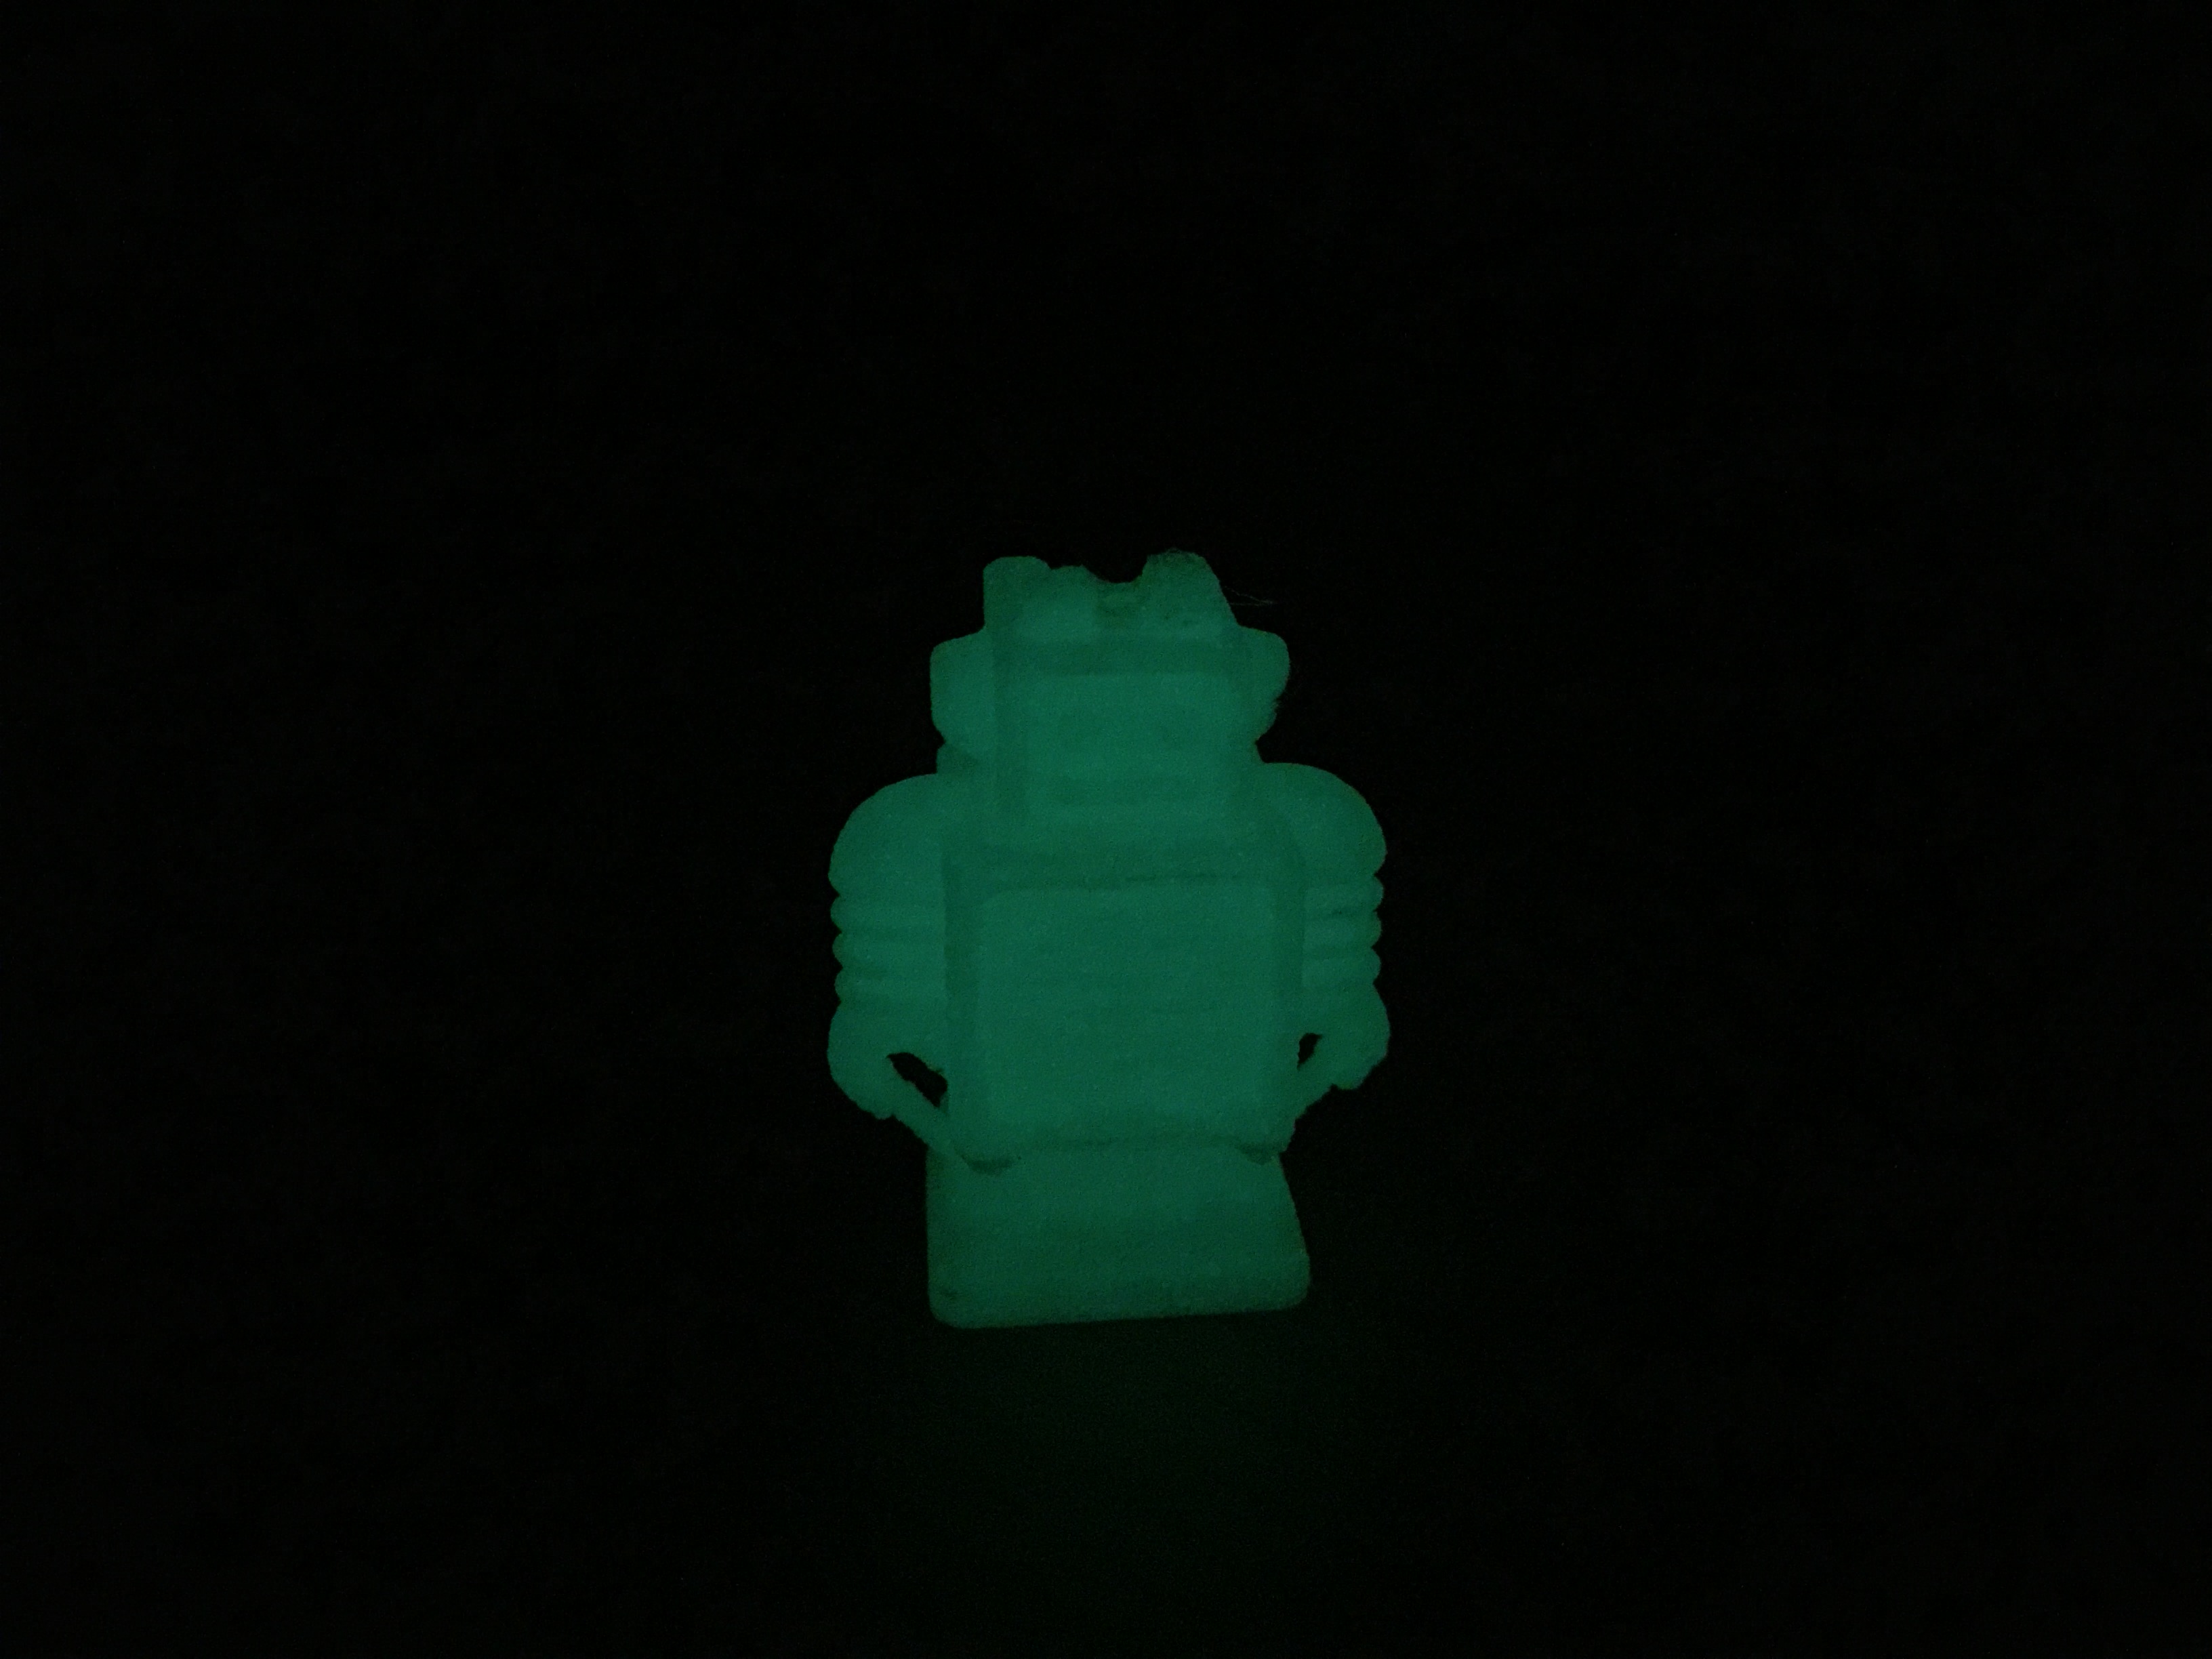 Ultimaker Robot in glow fill